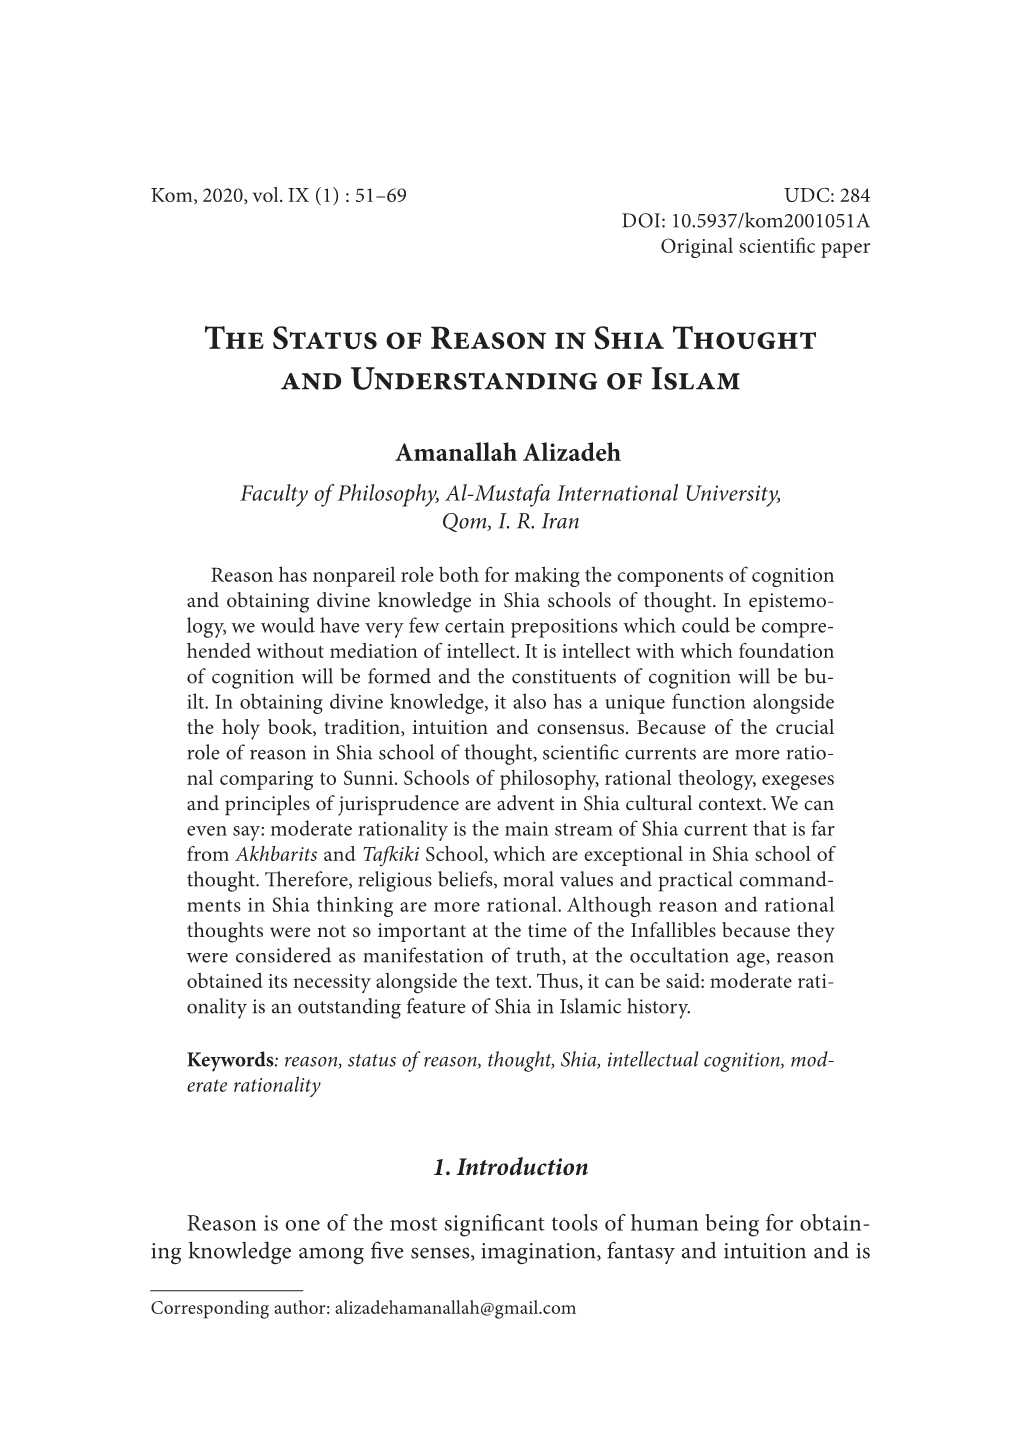 The Status of Reason in Shia Thought and Understanding of Islam